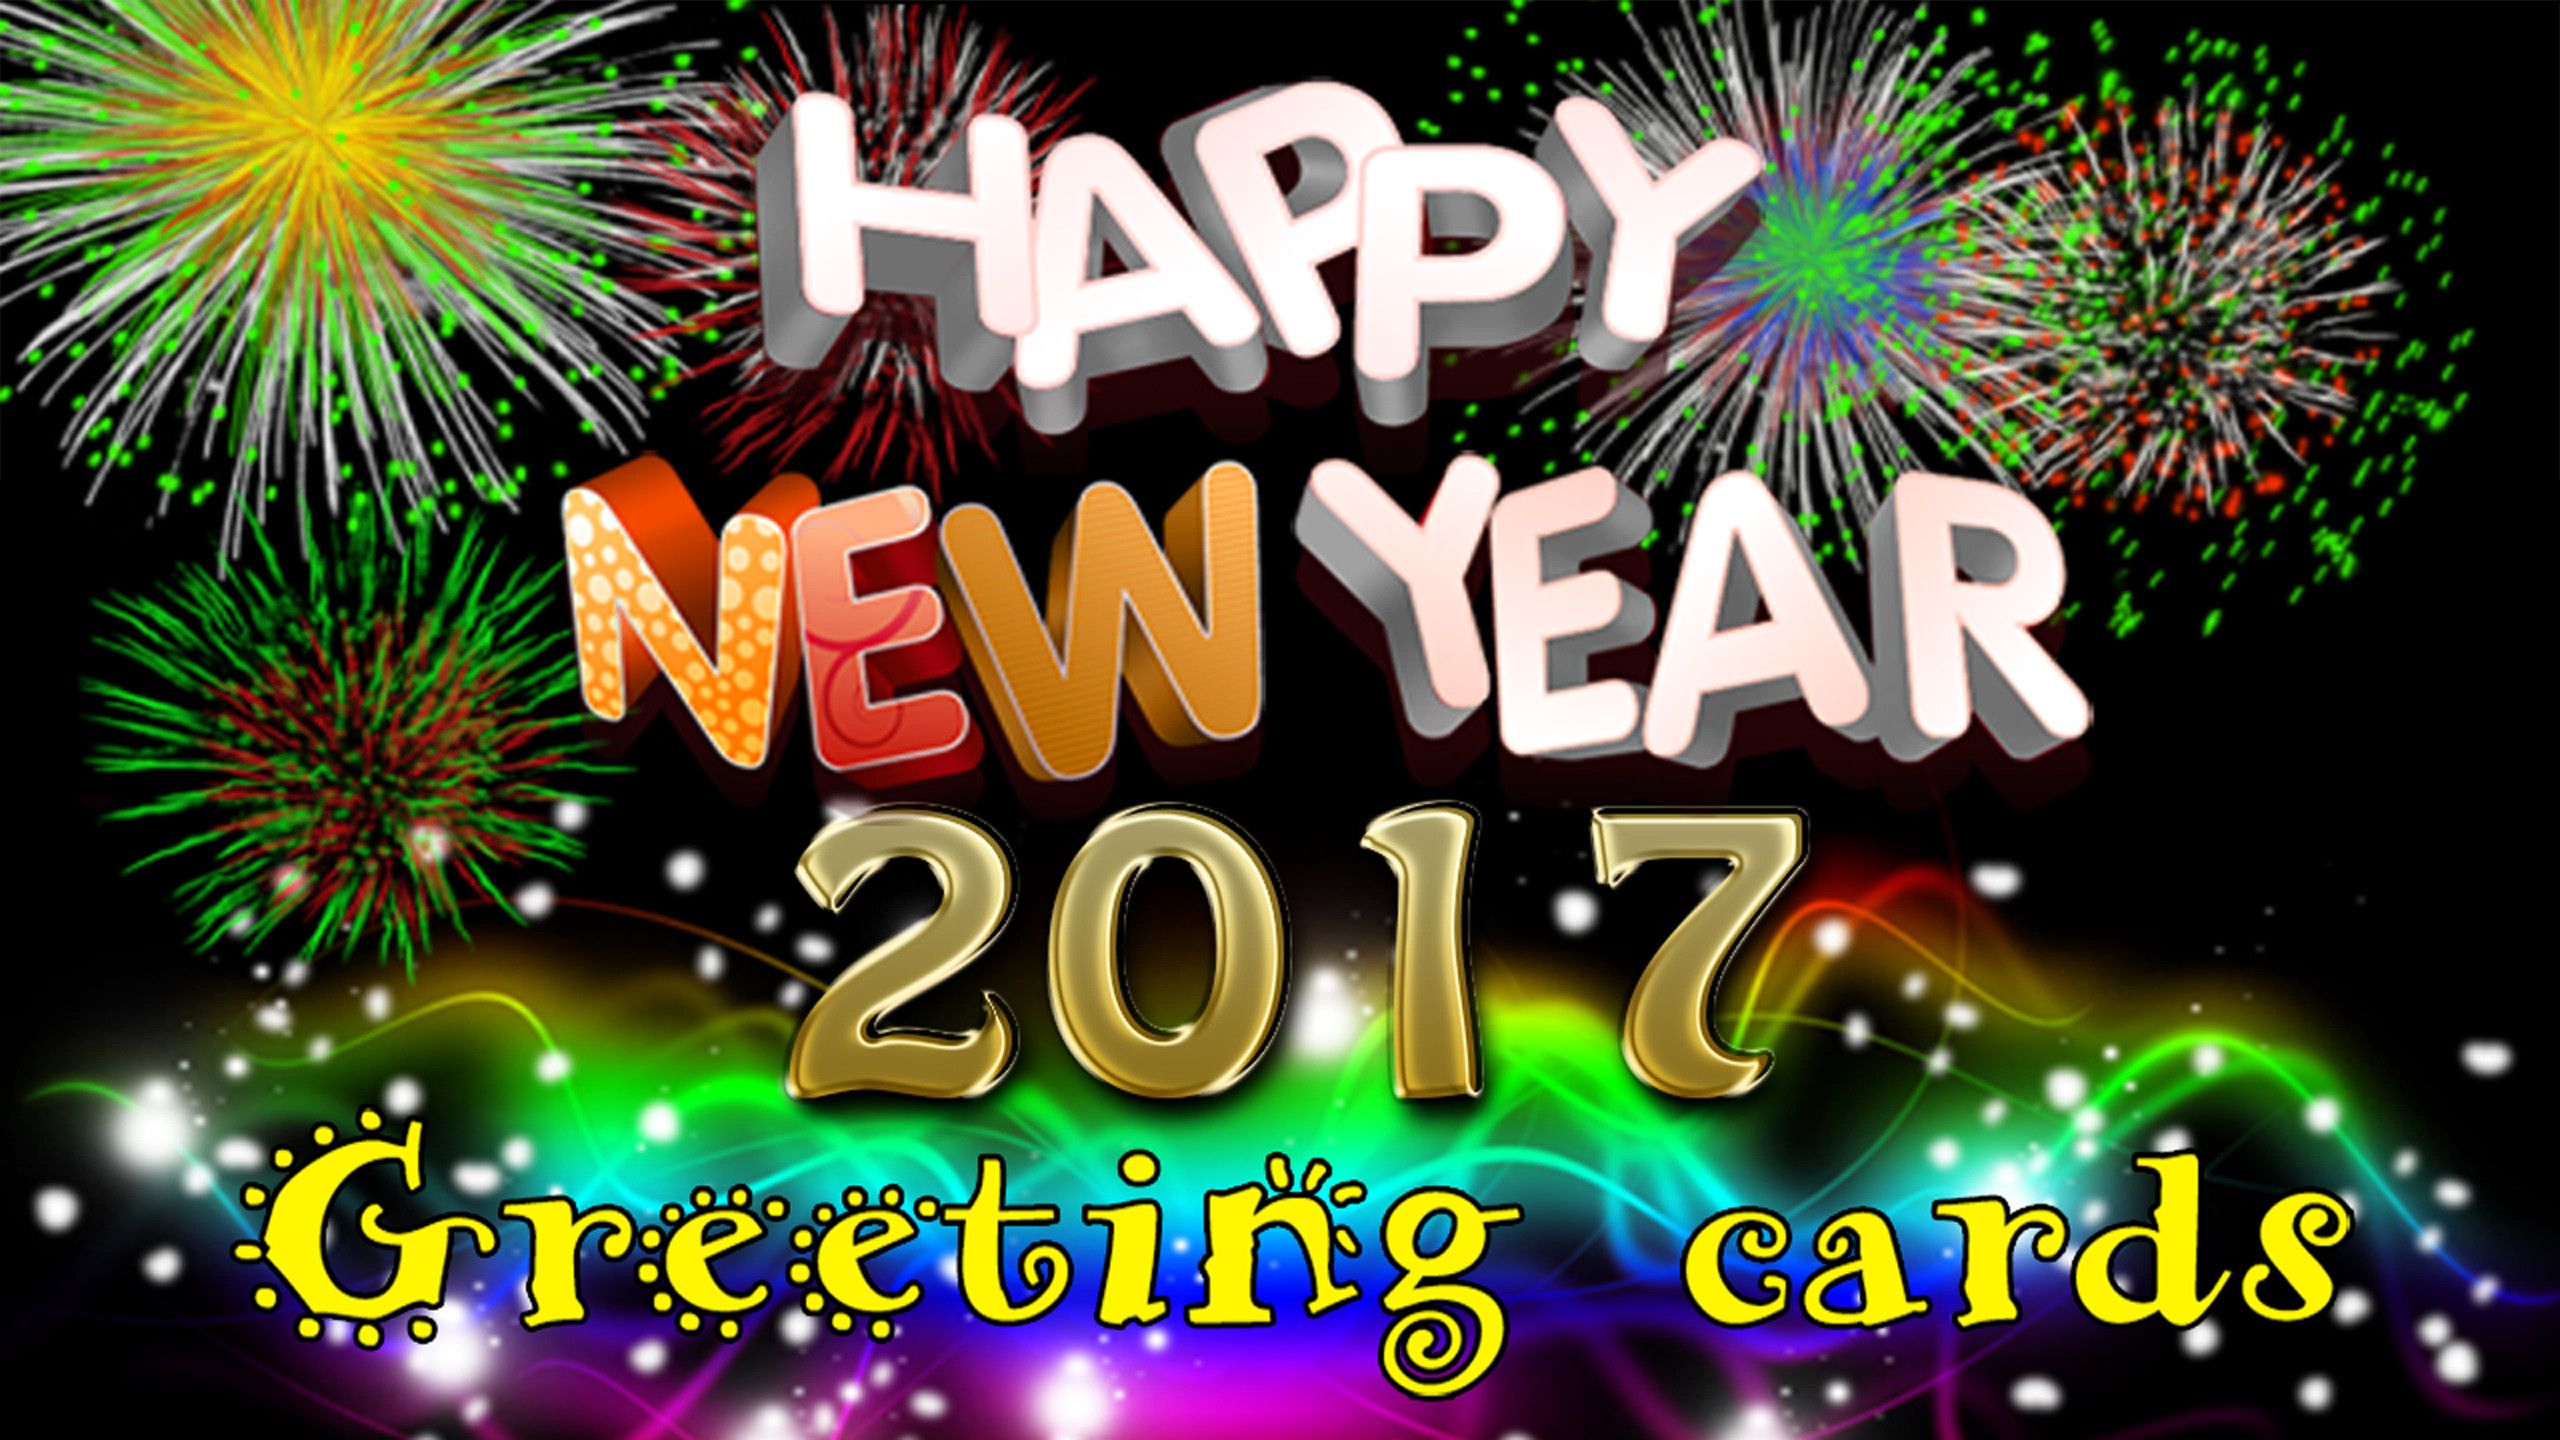 2560x1440 Happy New Year 2017 Greetings Cards Desktop Wallpaper Hd For Mobile Phones  And Laptops  : Wallpapers13.com